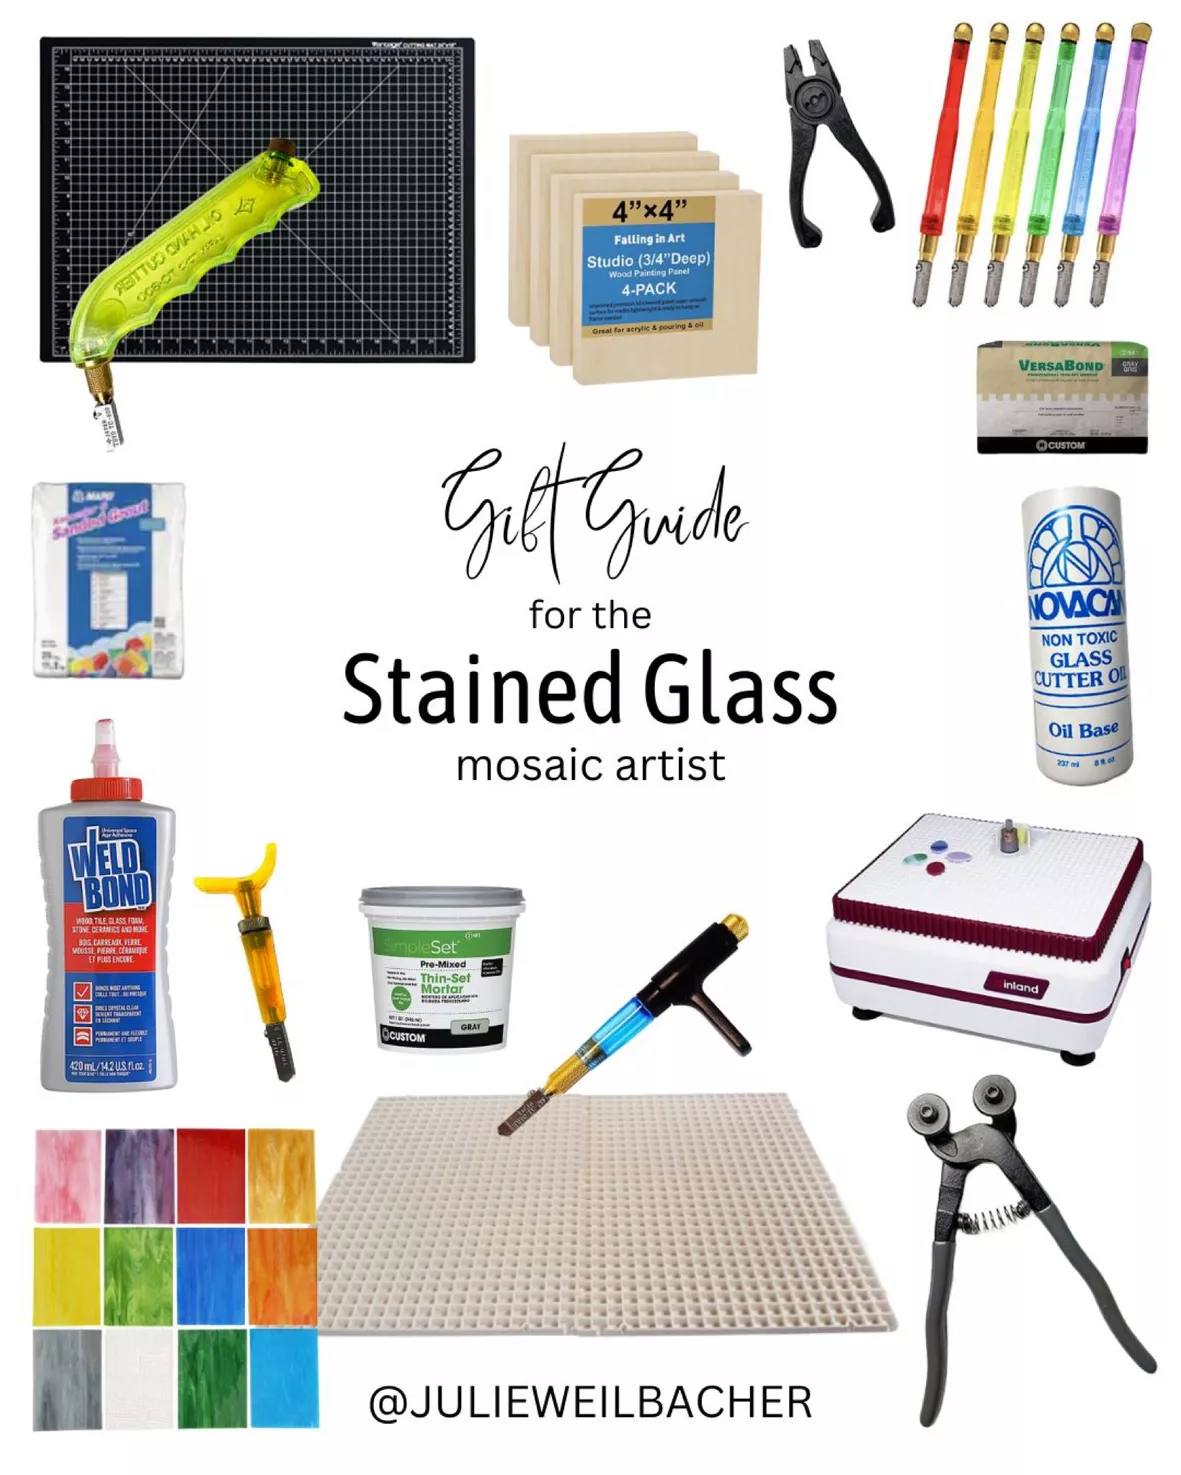 A Complete Guide on Stained Glass Tools & Supplies